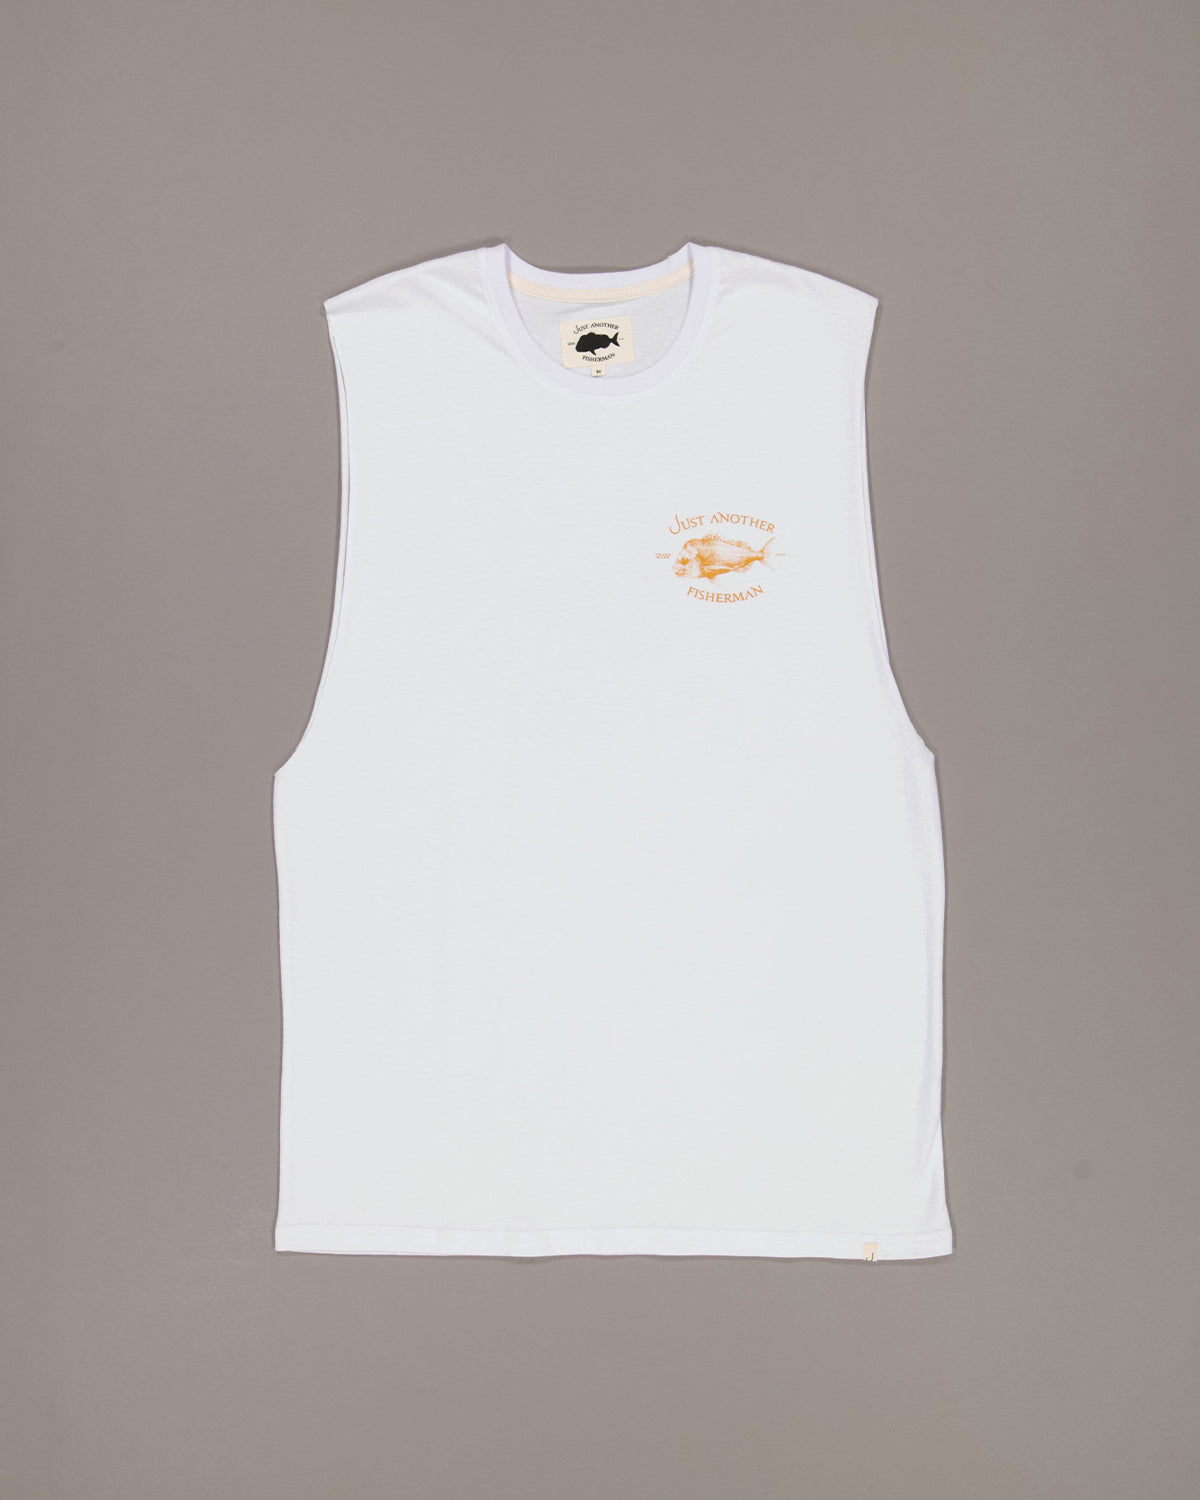 Just Another Fisherman Snapper Logo Tank - White